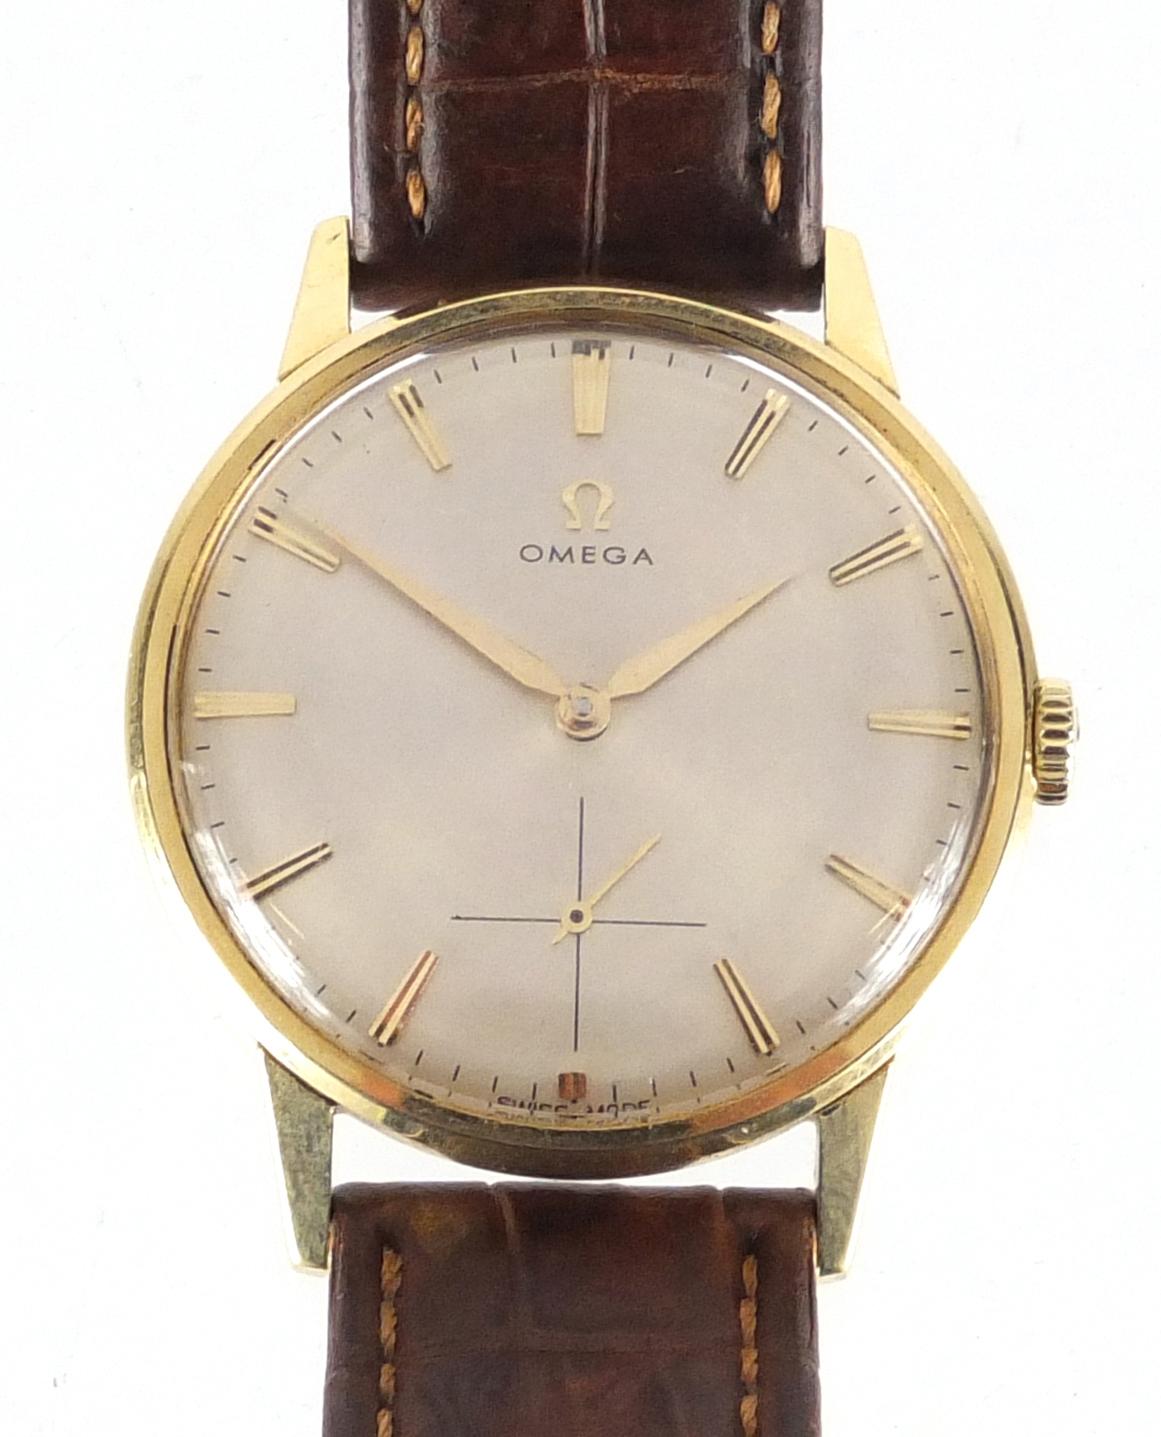 Gentleman's Omega 18ct gold wristwatch, the movement numbered 19191540, 3.5cm in diameter : For